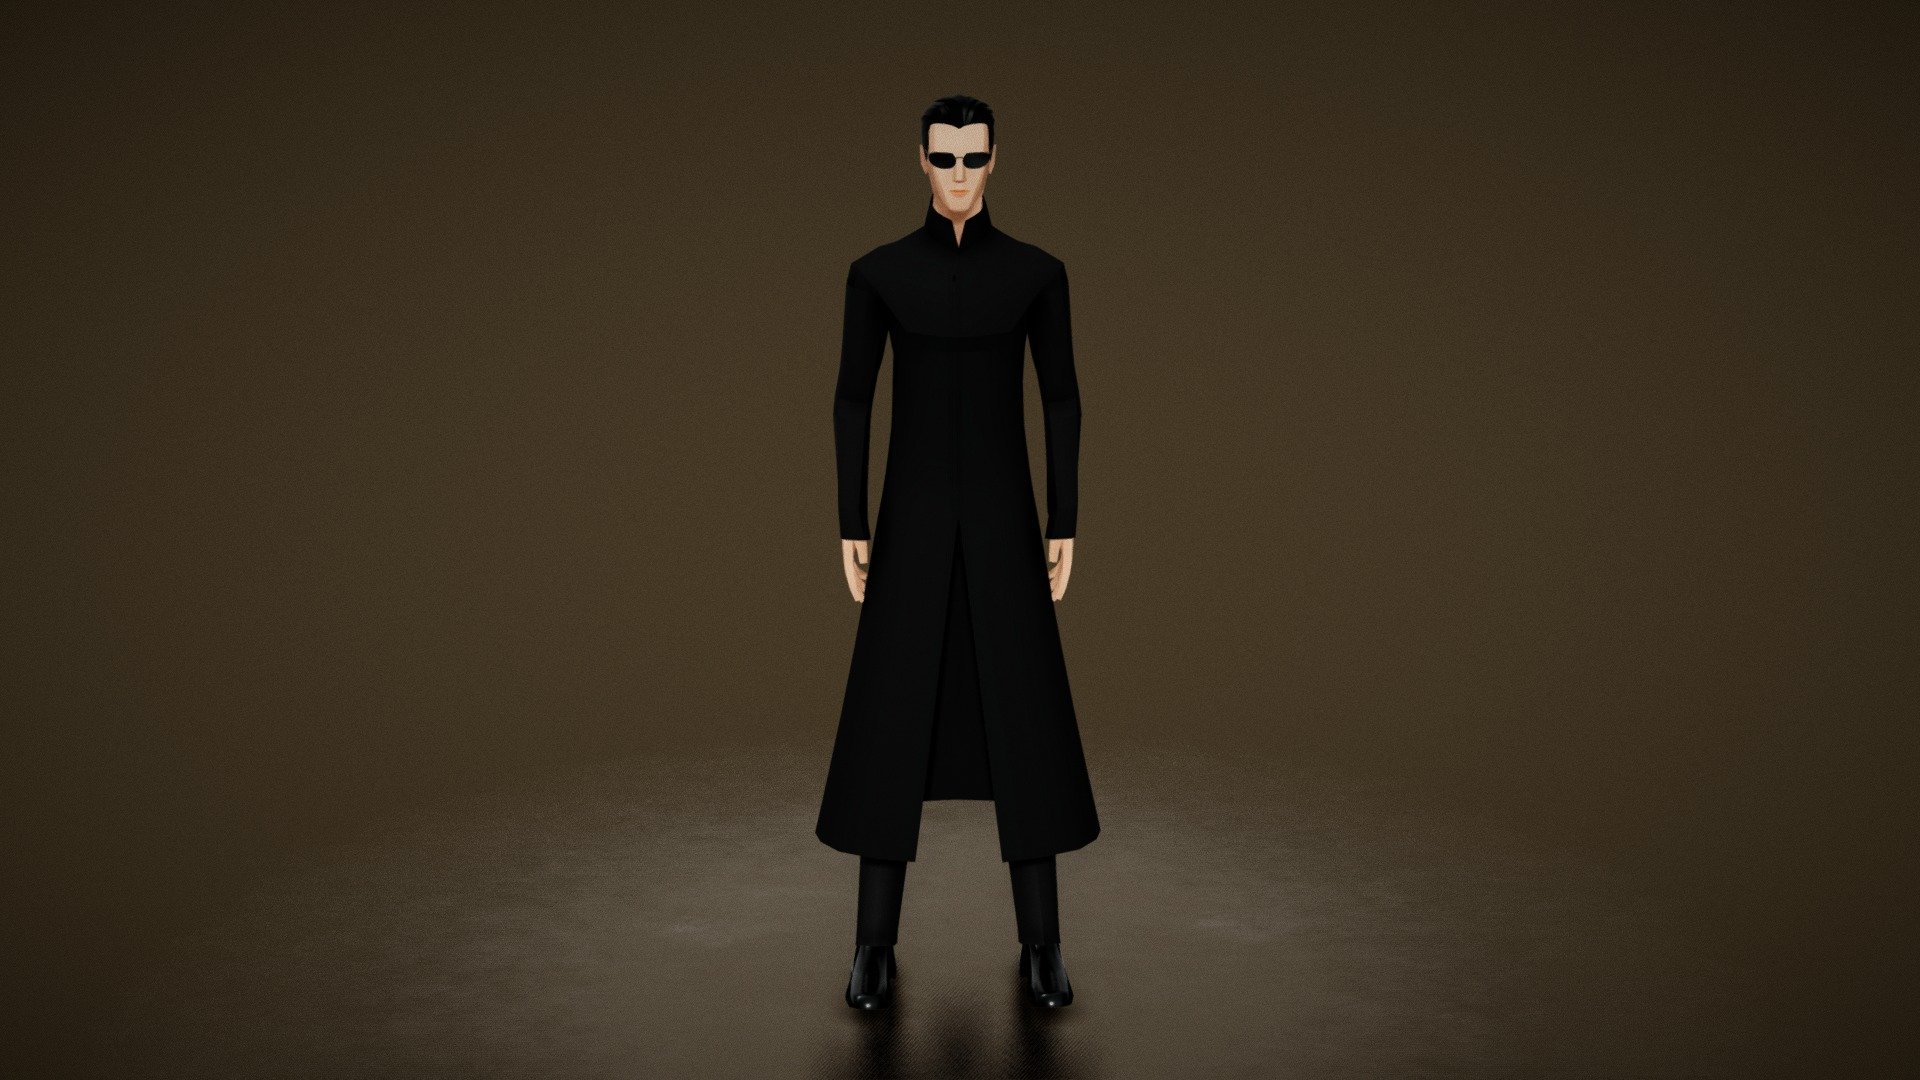 Neo from the matrix in a lowpoly style,
Its Modeled and Rigged in blender.

Feel free to contact me if any query 3d model